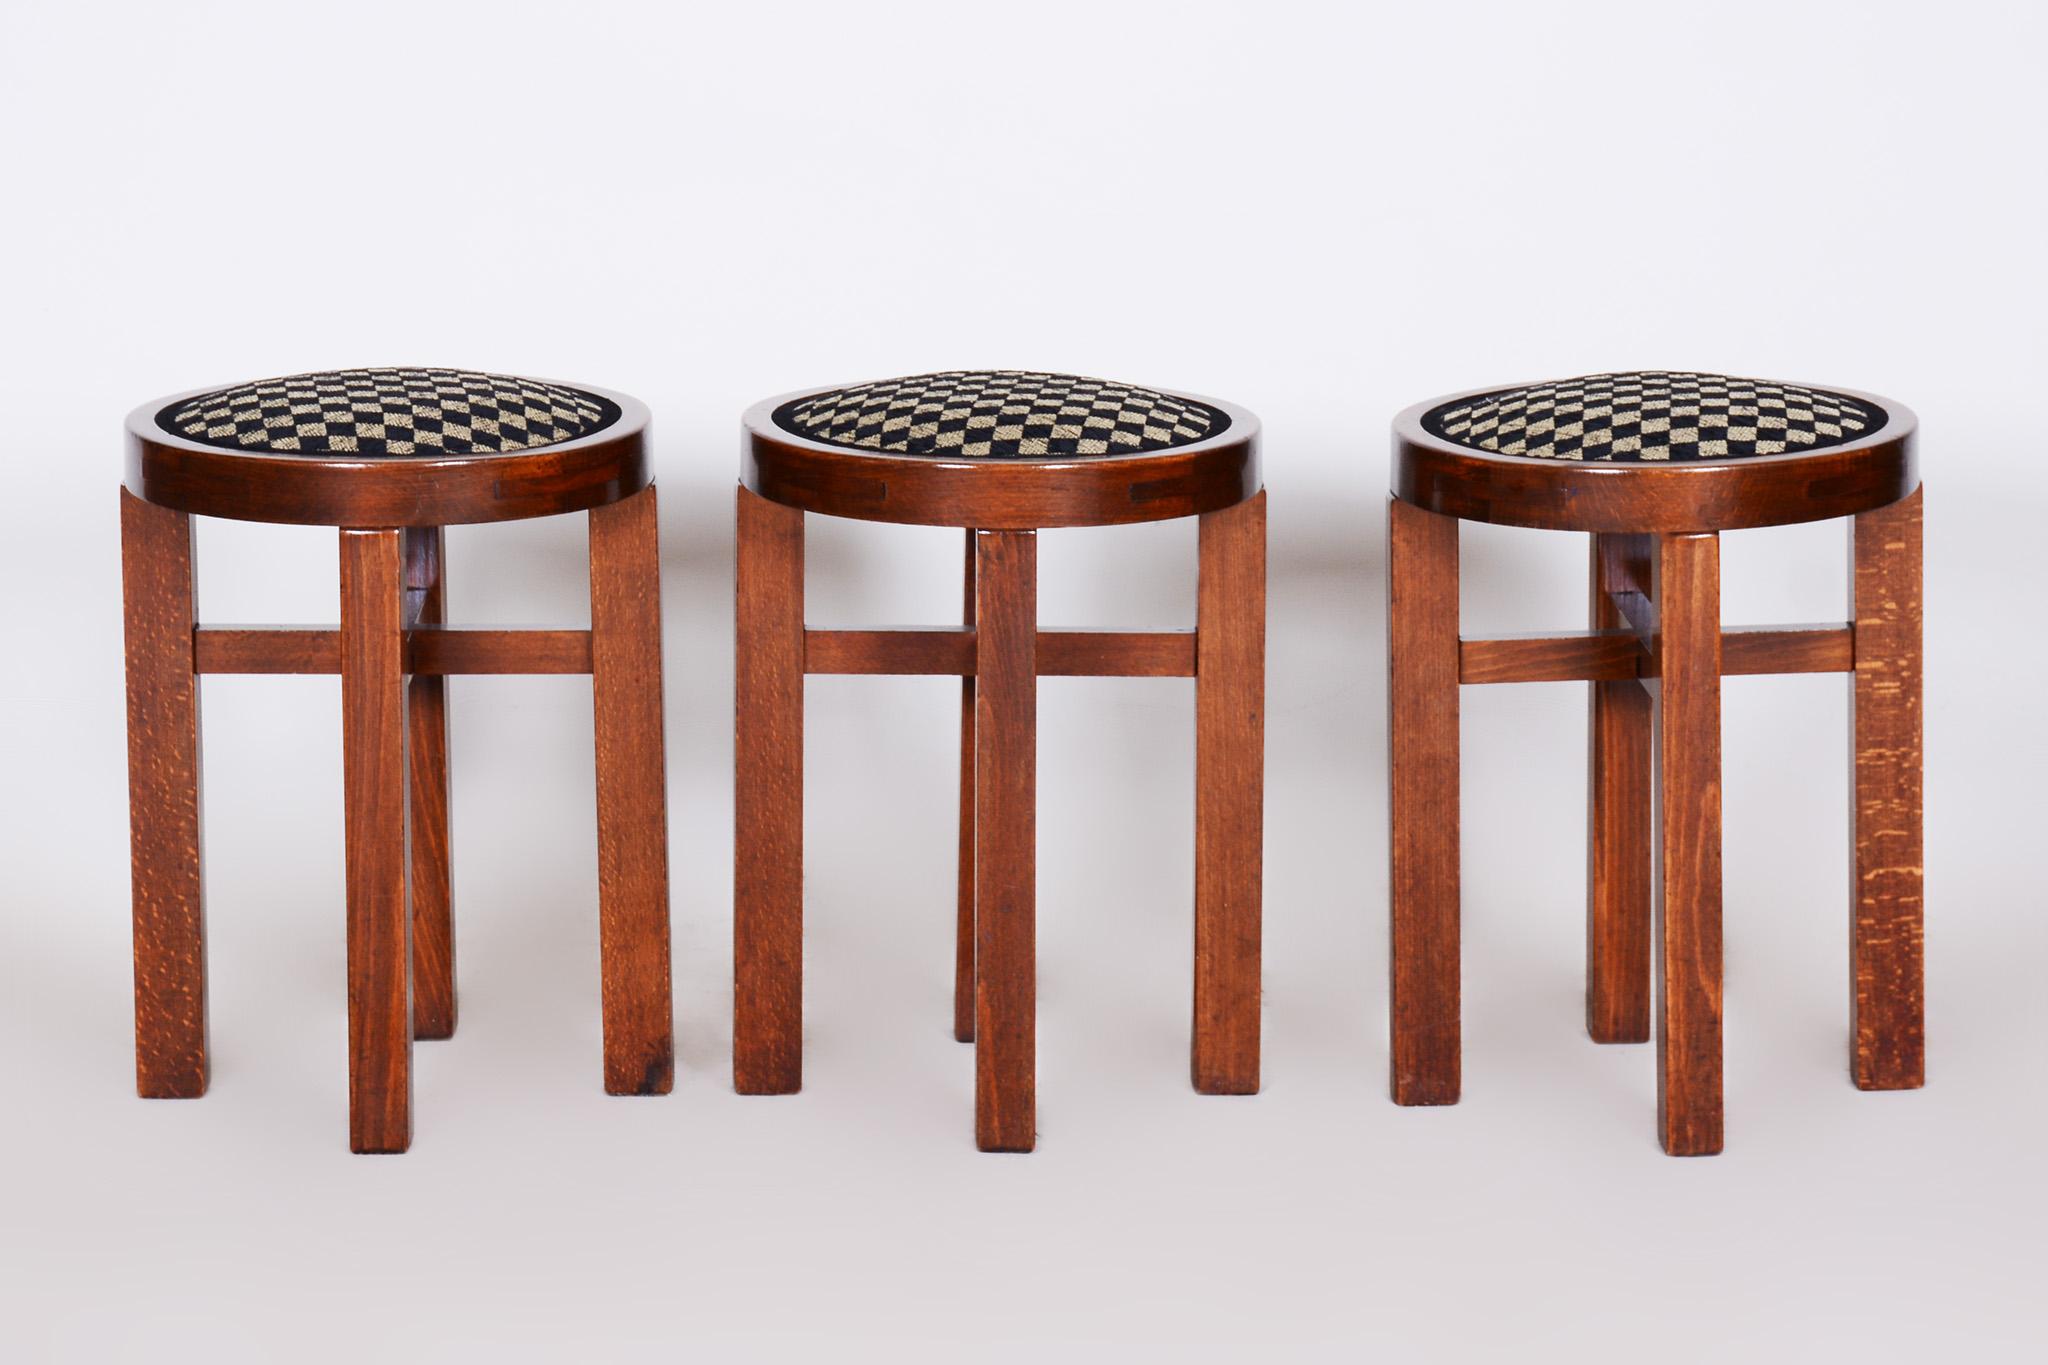 Art Deco Set of 3 ArtDeco Foot Stools Made in´20s Czechia, New upholstery, Revived polish For Sale